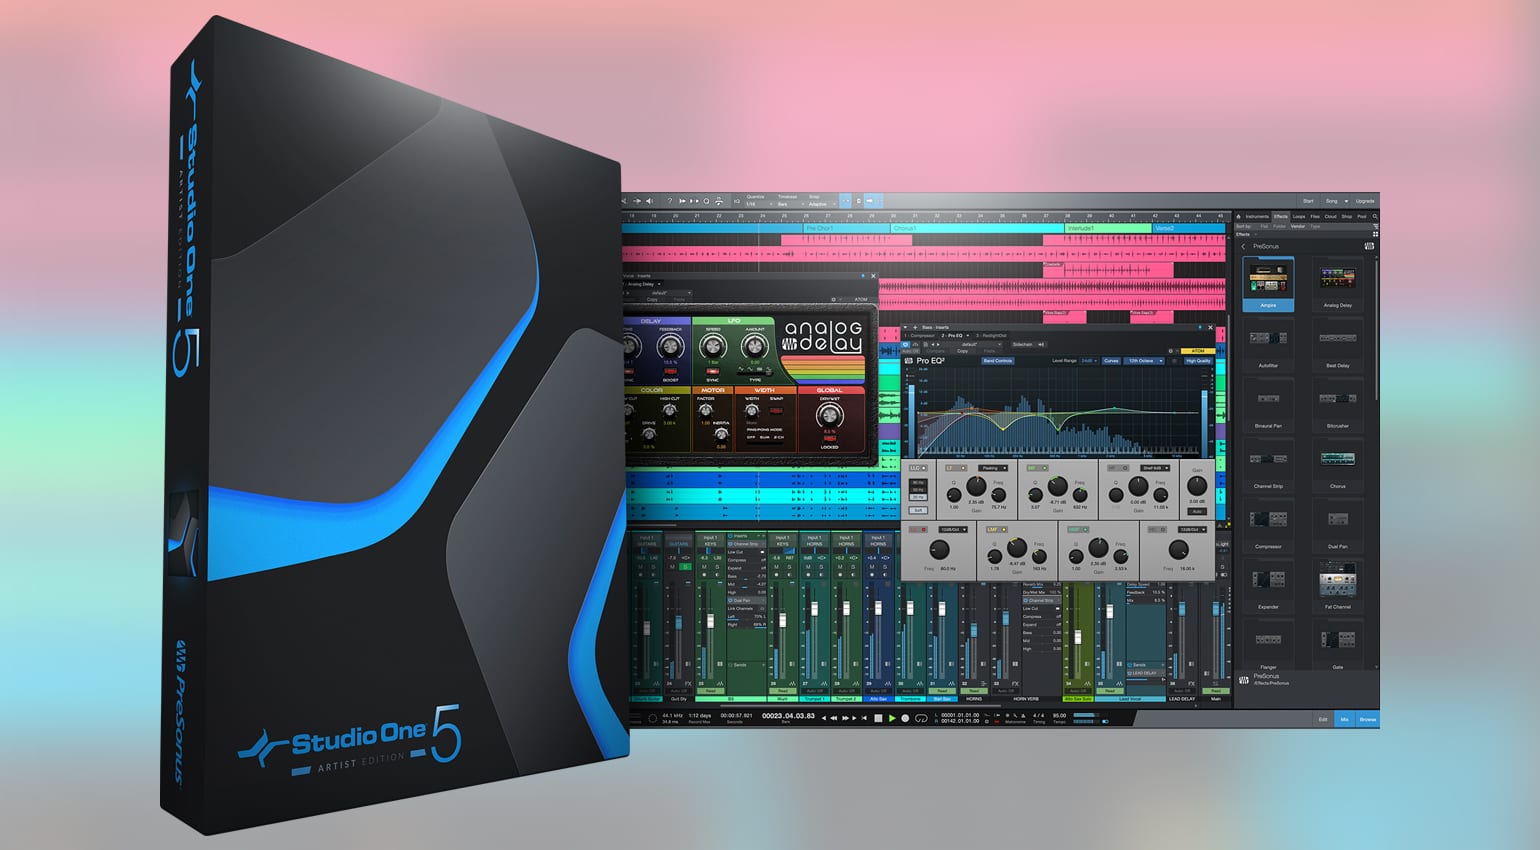 PreSonus has announced Studio One 5. The new version of the popular DAW comes with a long list of new features, including redesigned effects, clip gai